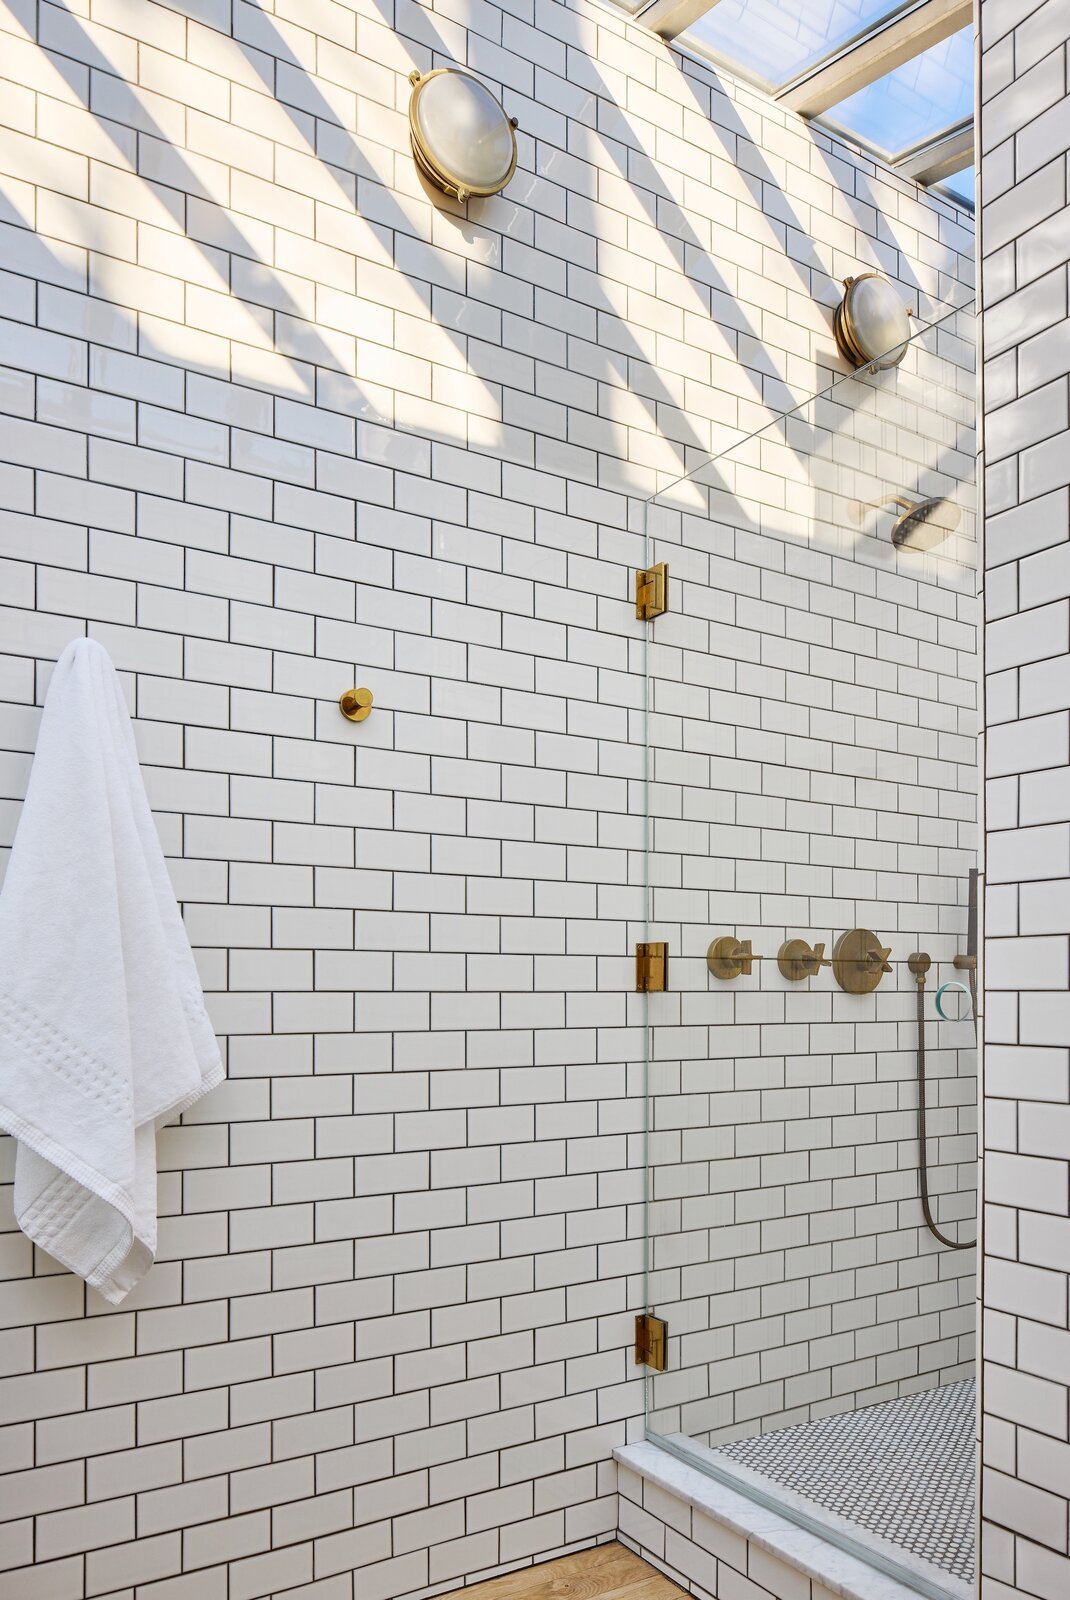  White subway tile with charcoal-colored grout covers the primary bath where sunlight streams in from overhead thanks to a huge, new skylight that is 10 feet at its highest point. Wall sconces from The Urban Electric Co. lend a nautical feel. 